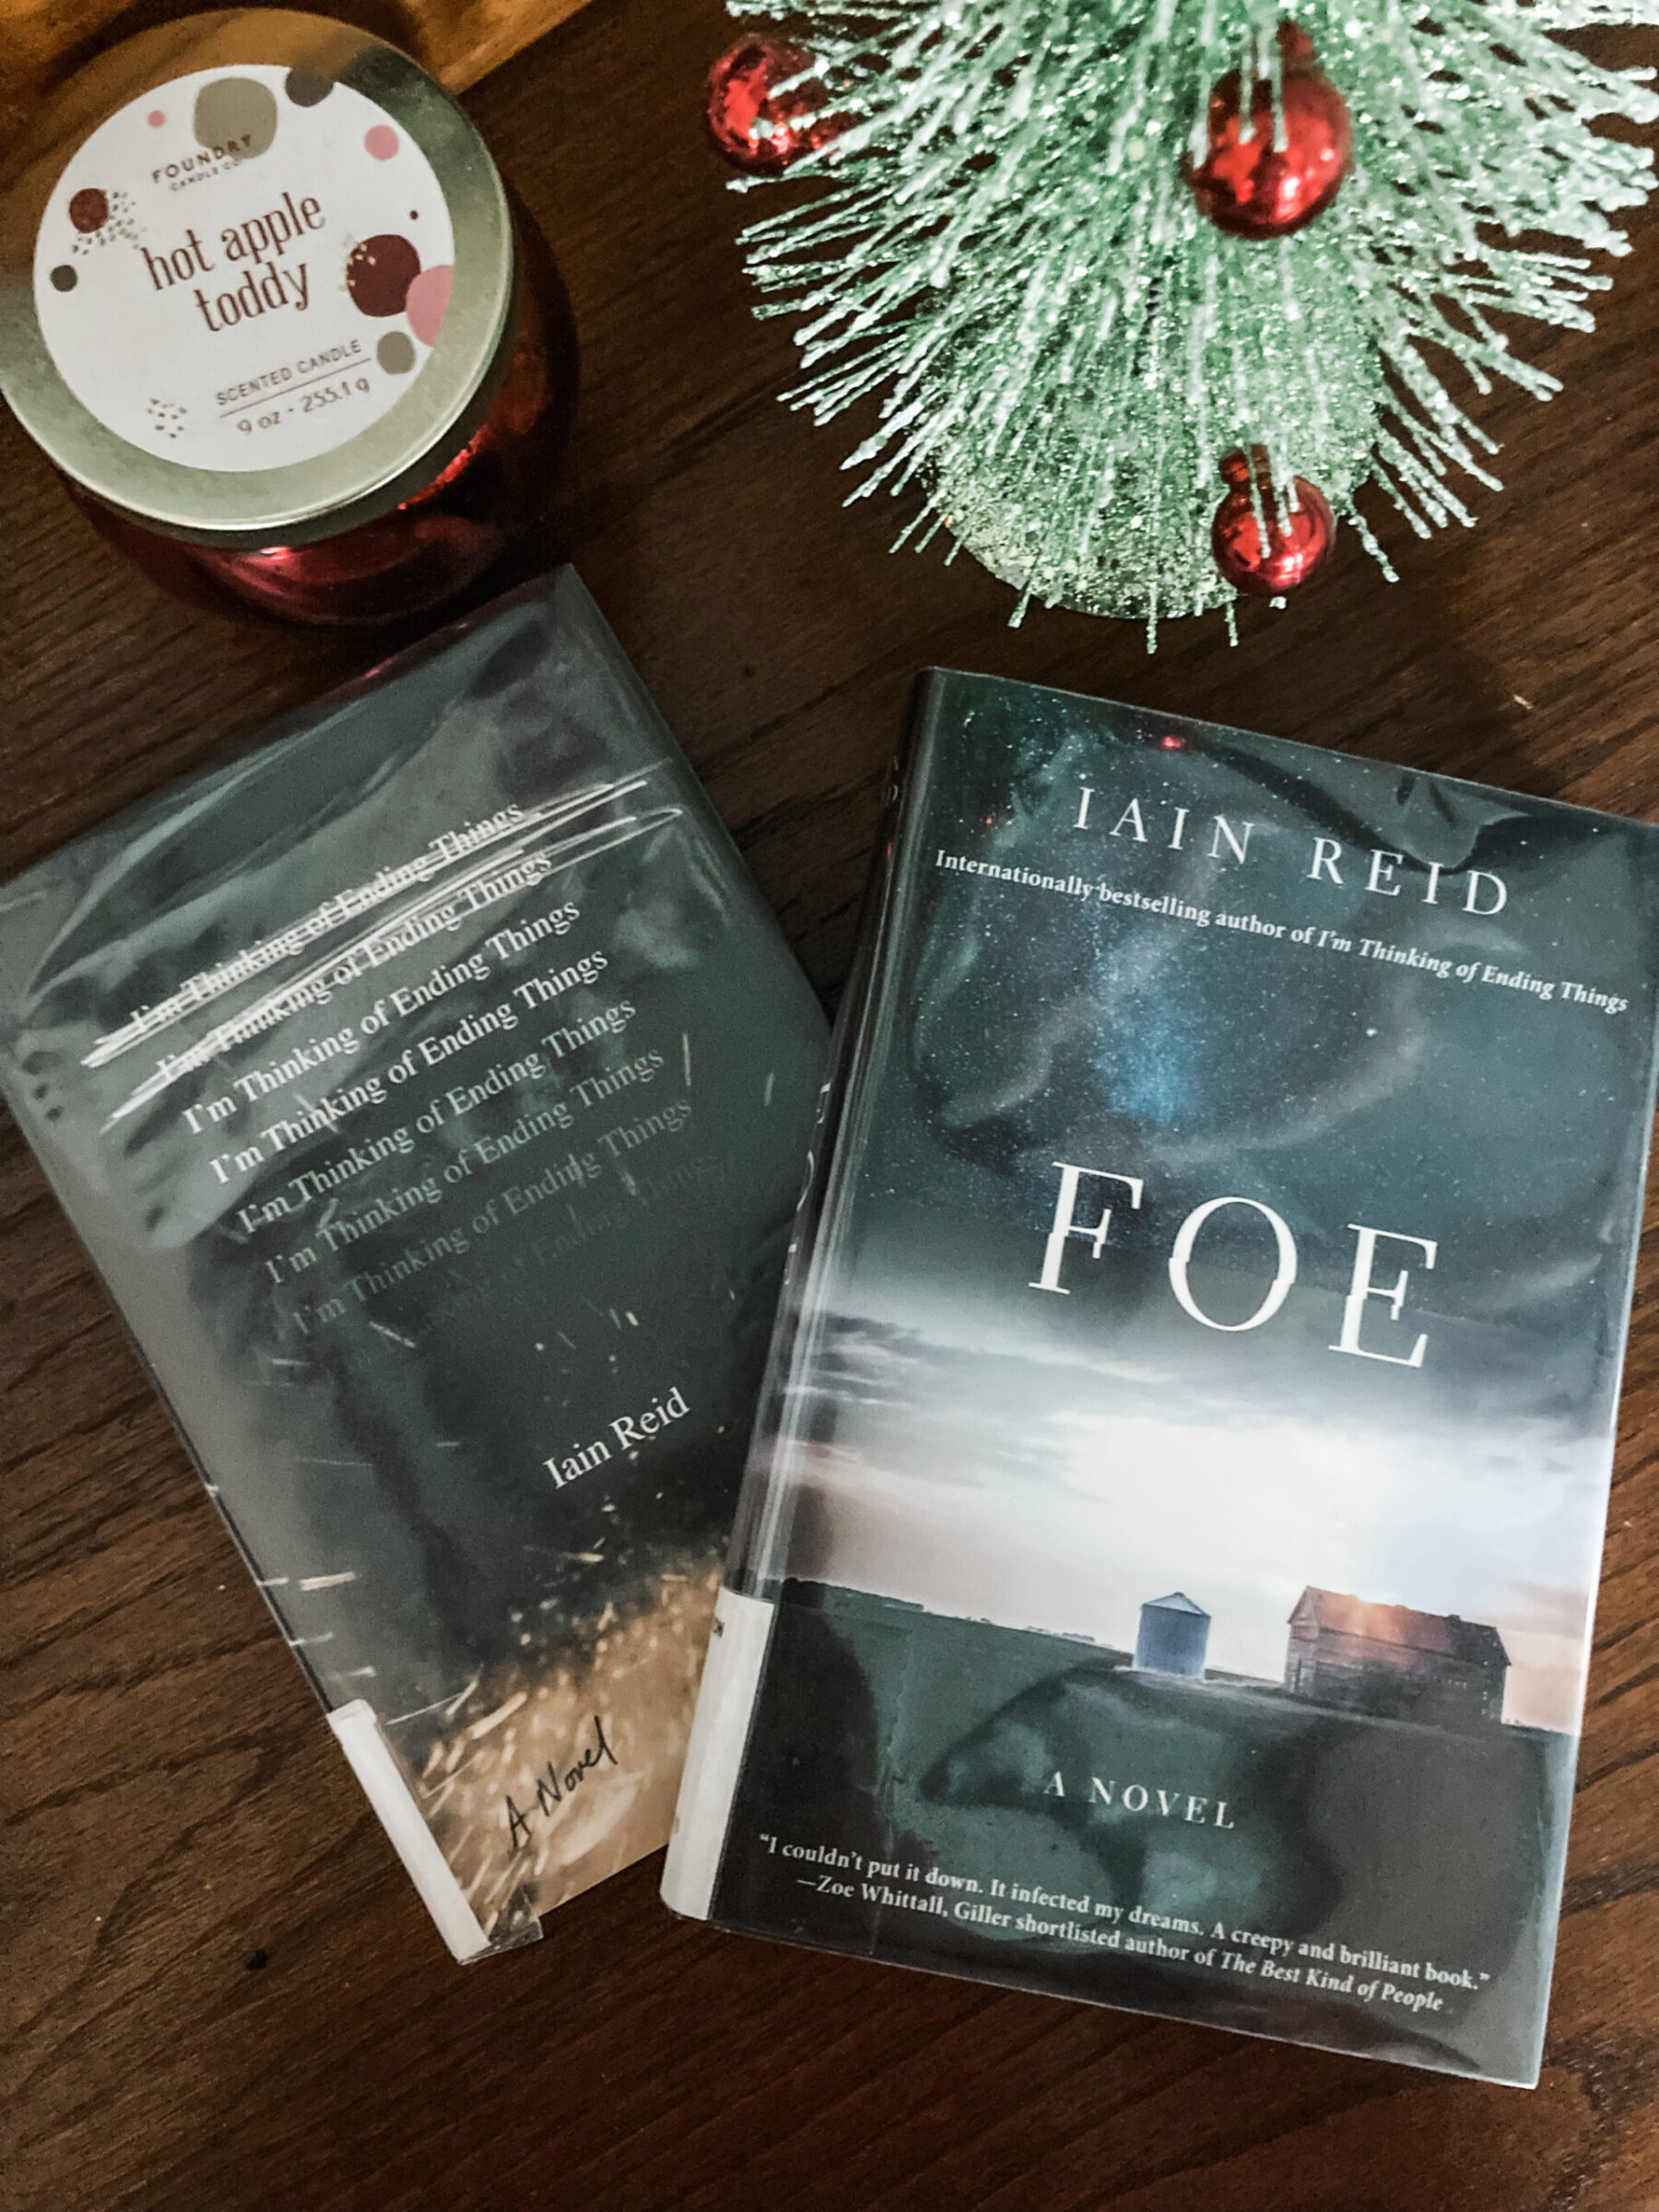 The Mother-Daughter Book Club #3—Foe and I’m Thinking of Ending Things, by Ian Reid